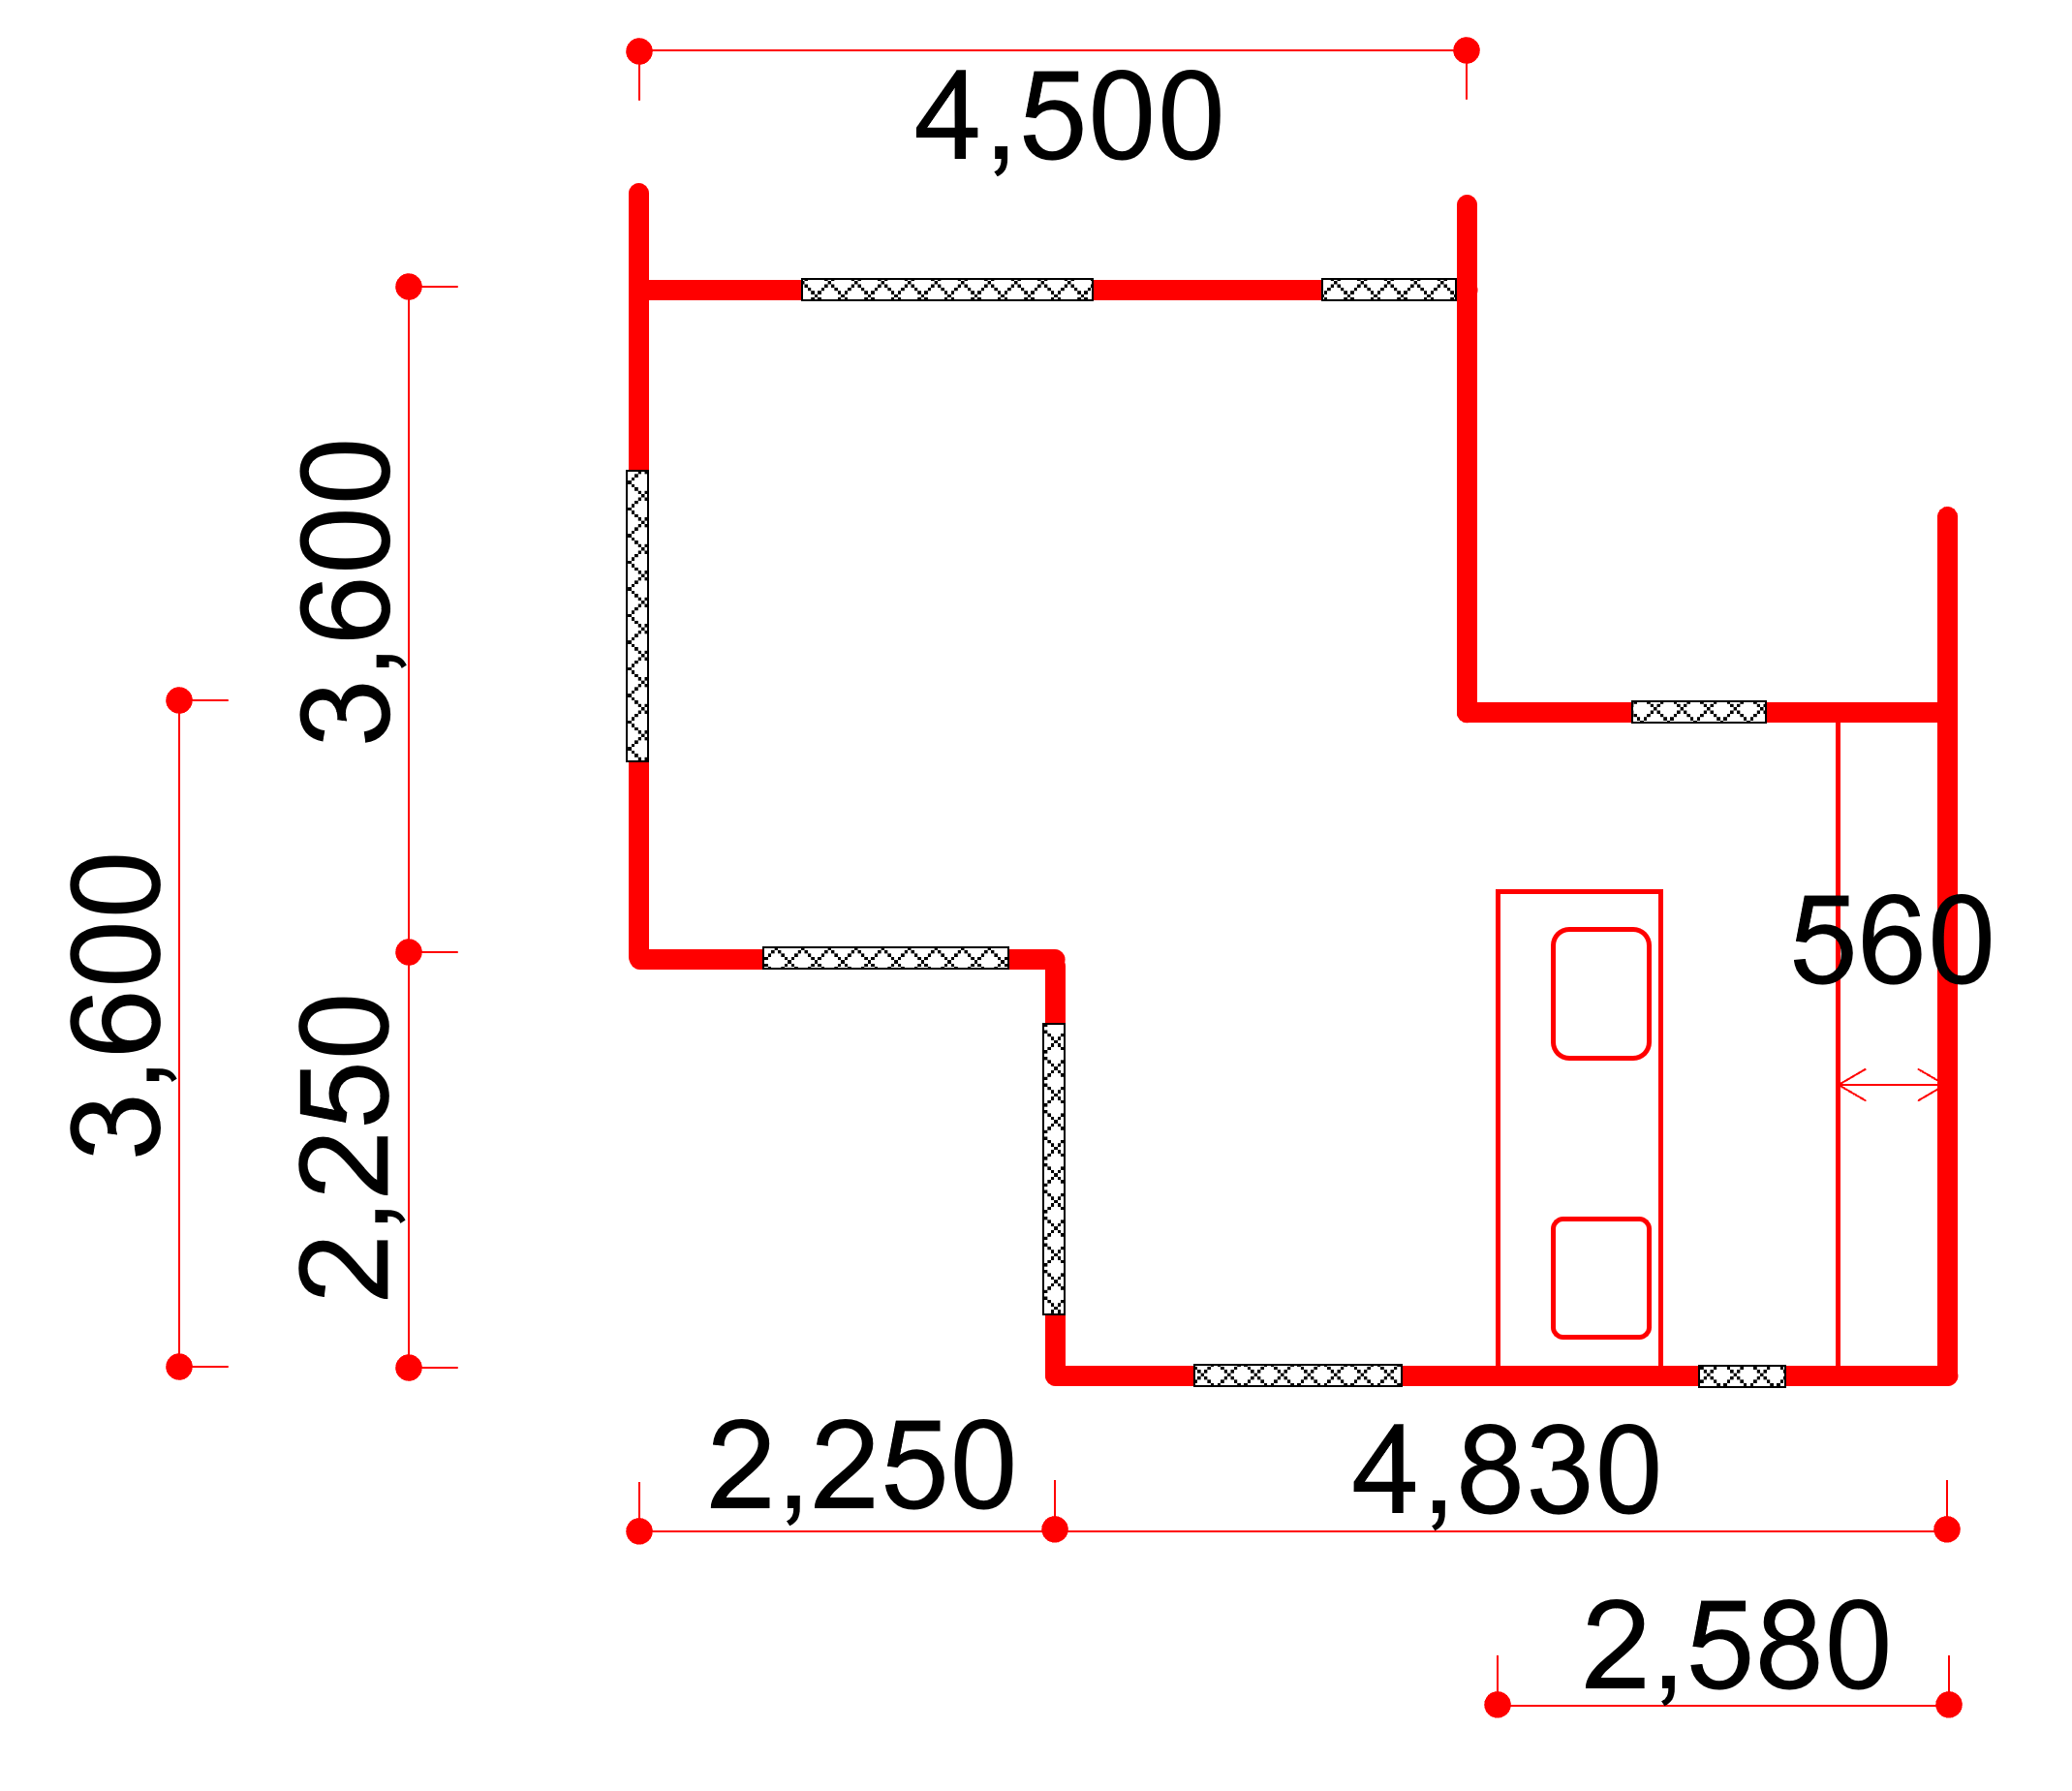 Traced LDK area and dimensions (length in mm). Windows and doors are in hatching (they are closed in the present simulations, so they are treated as walls).